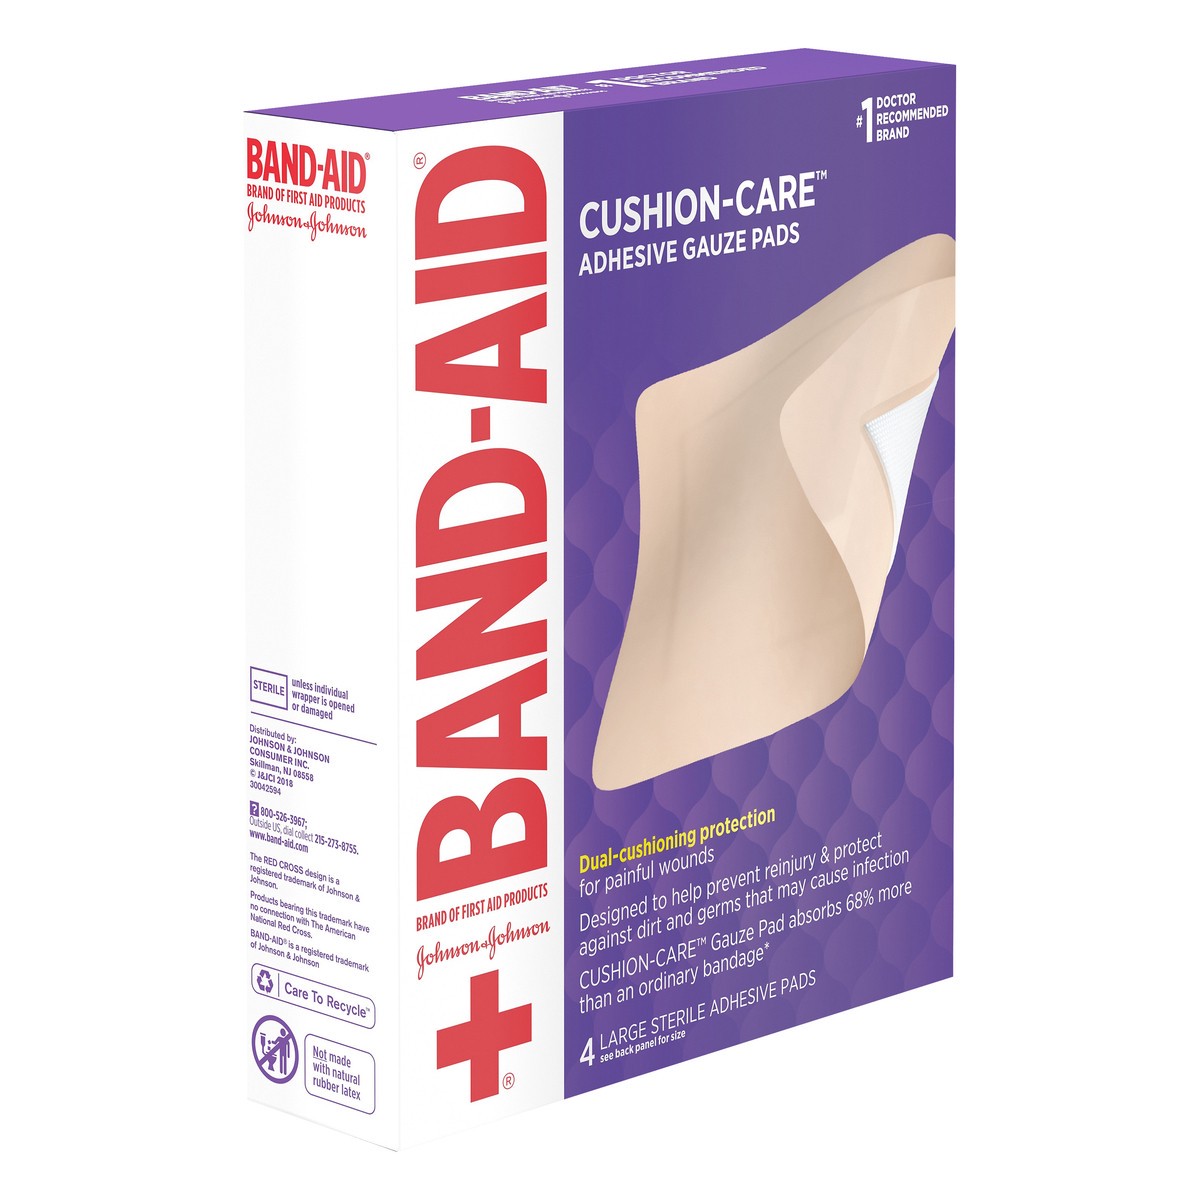 slide 2 of 7, BAND-AID of First Aid Products Cushion-Care Adhesive Gauze Pad, Breathable and Absorbent Pad to Help Keep Wounds Clean, Large, 4.5 inches by 5.5 inches, 4 ct, 4 ct